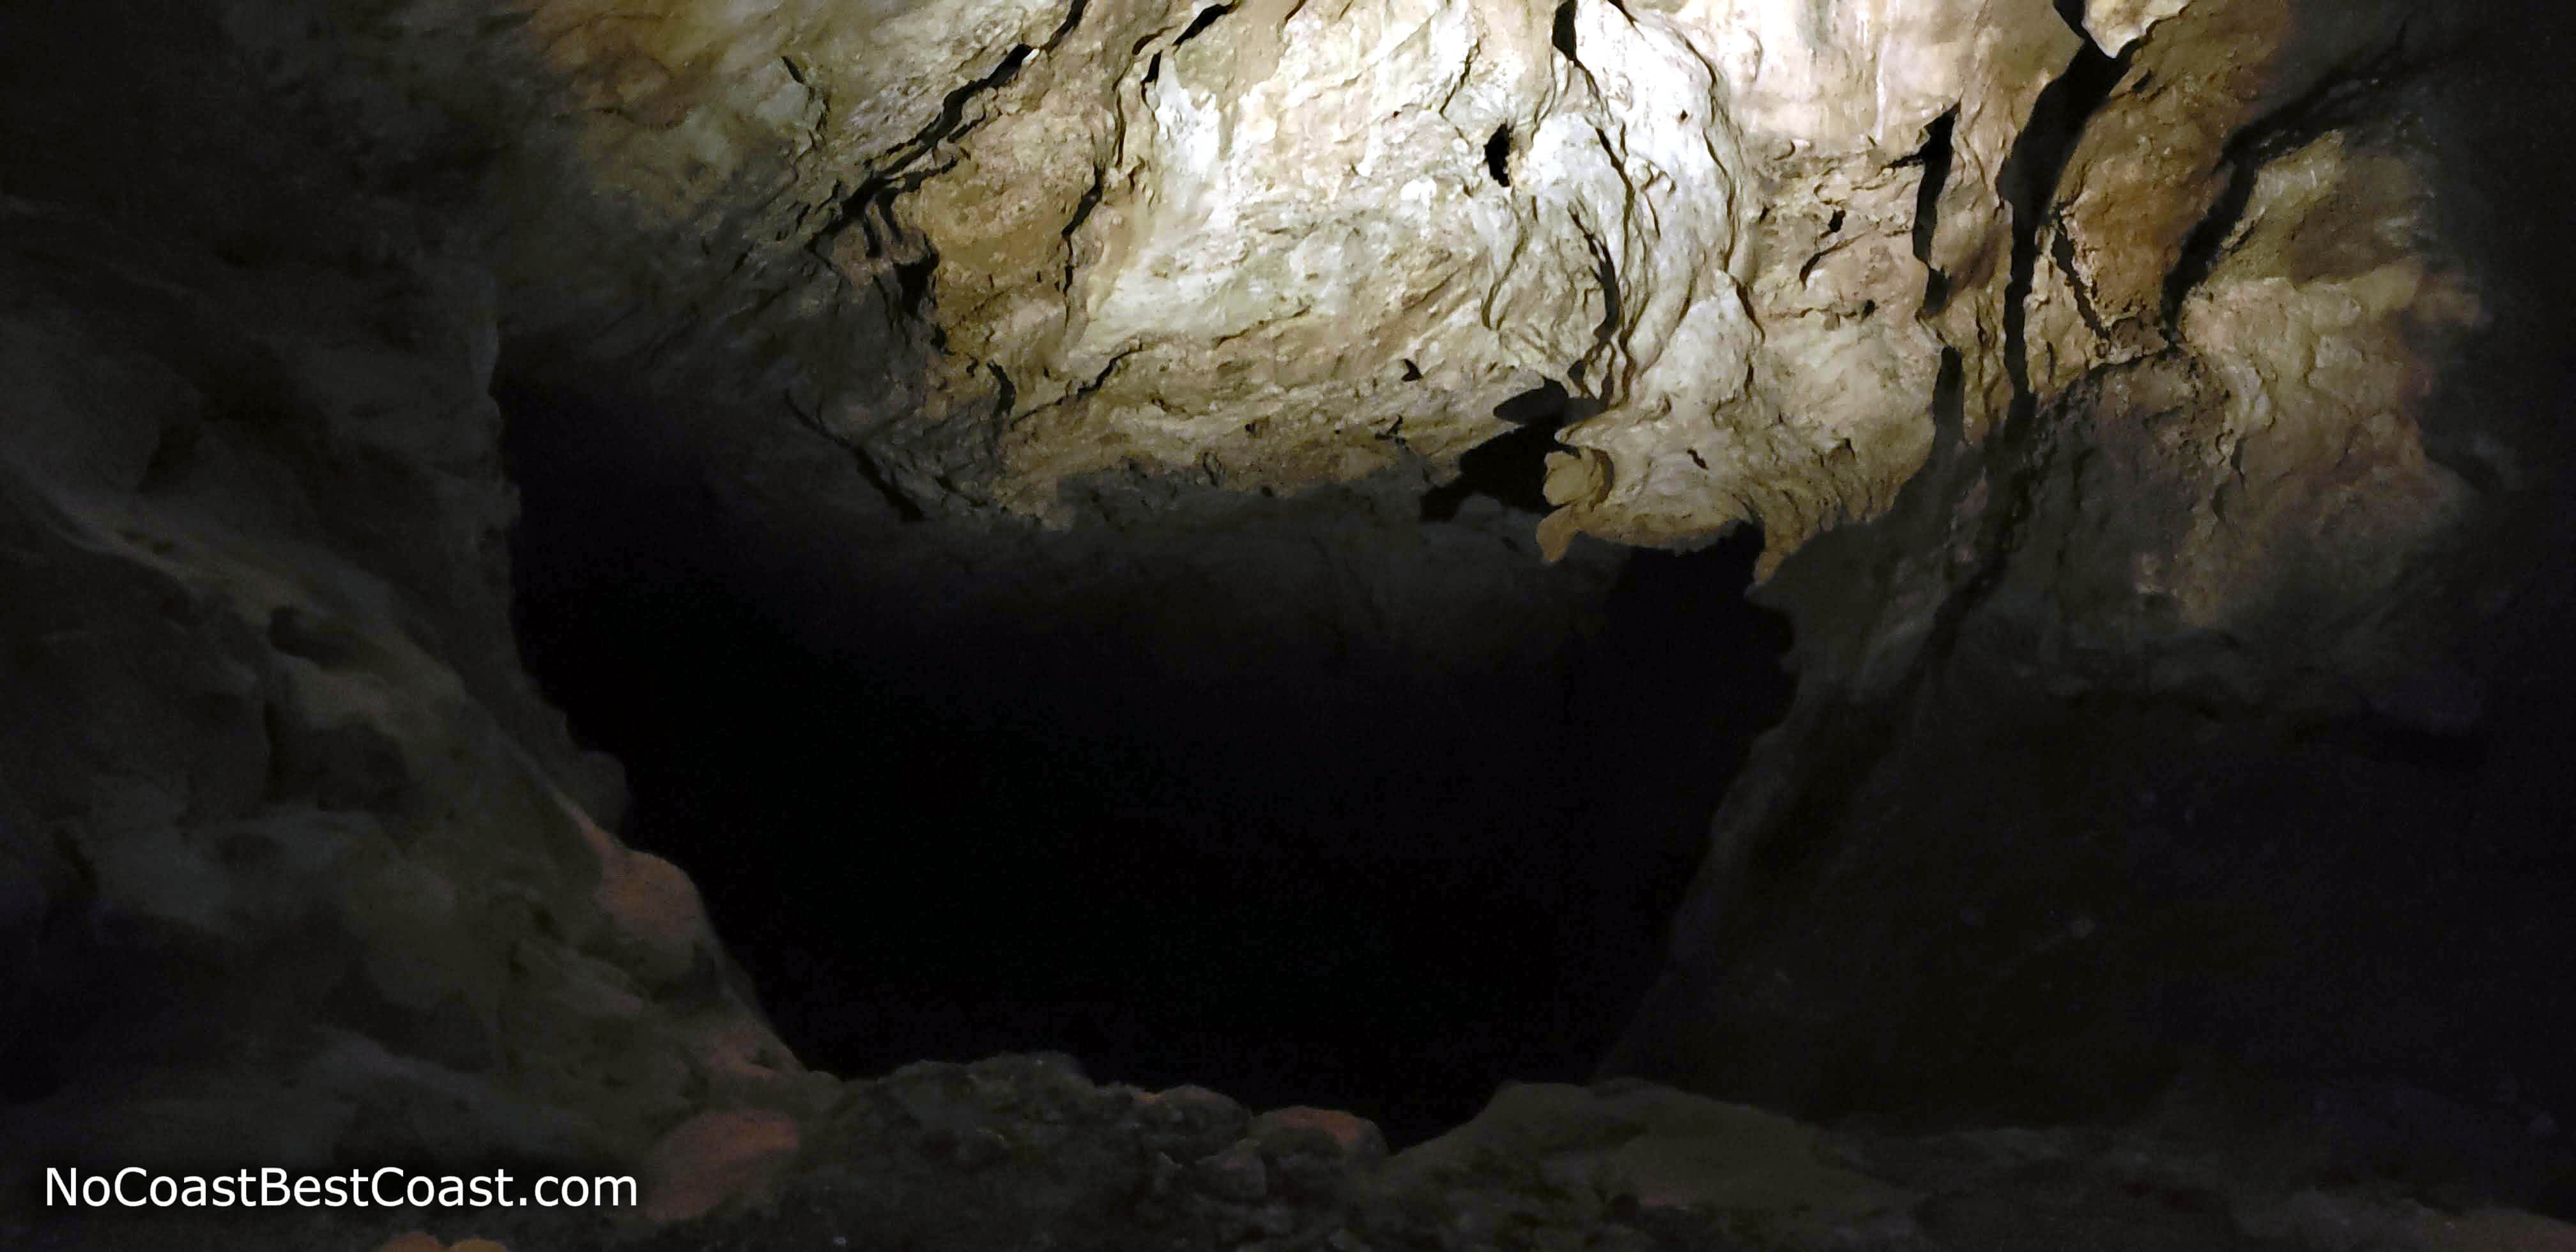 This black abyss known as the Bottomless Pit is actually only 140 feet deep